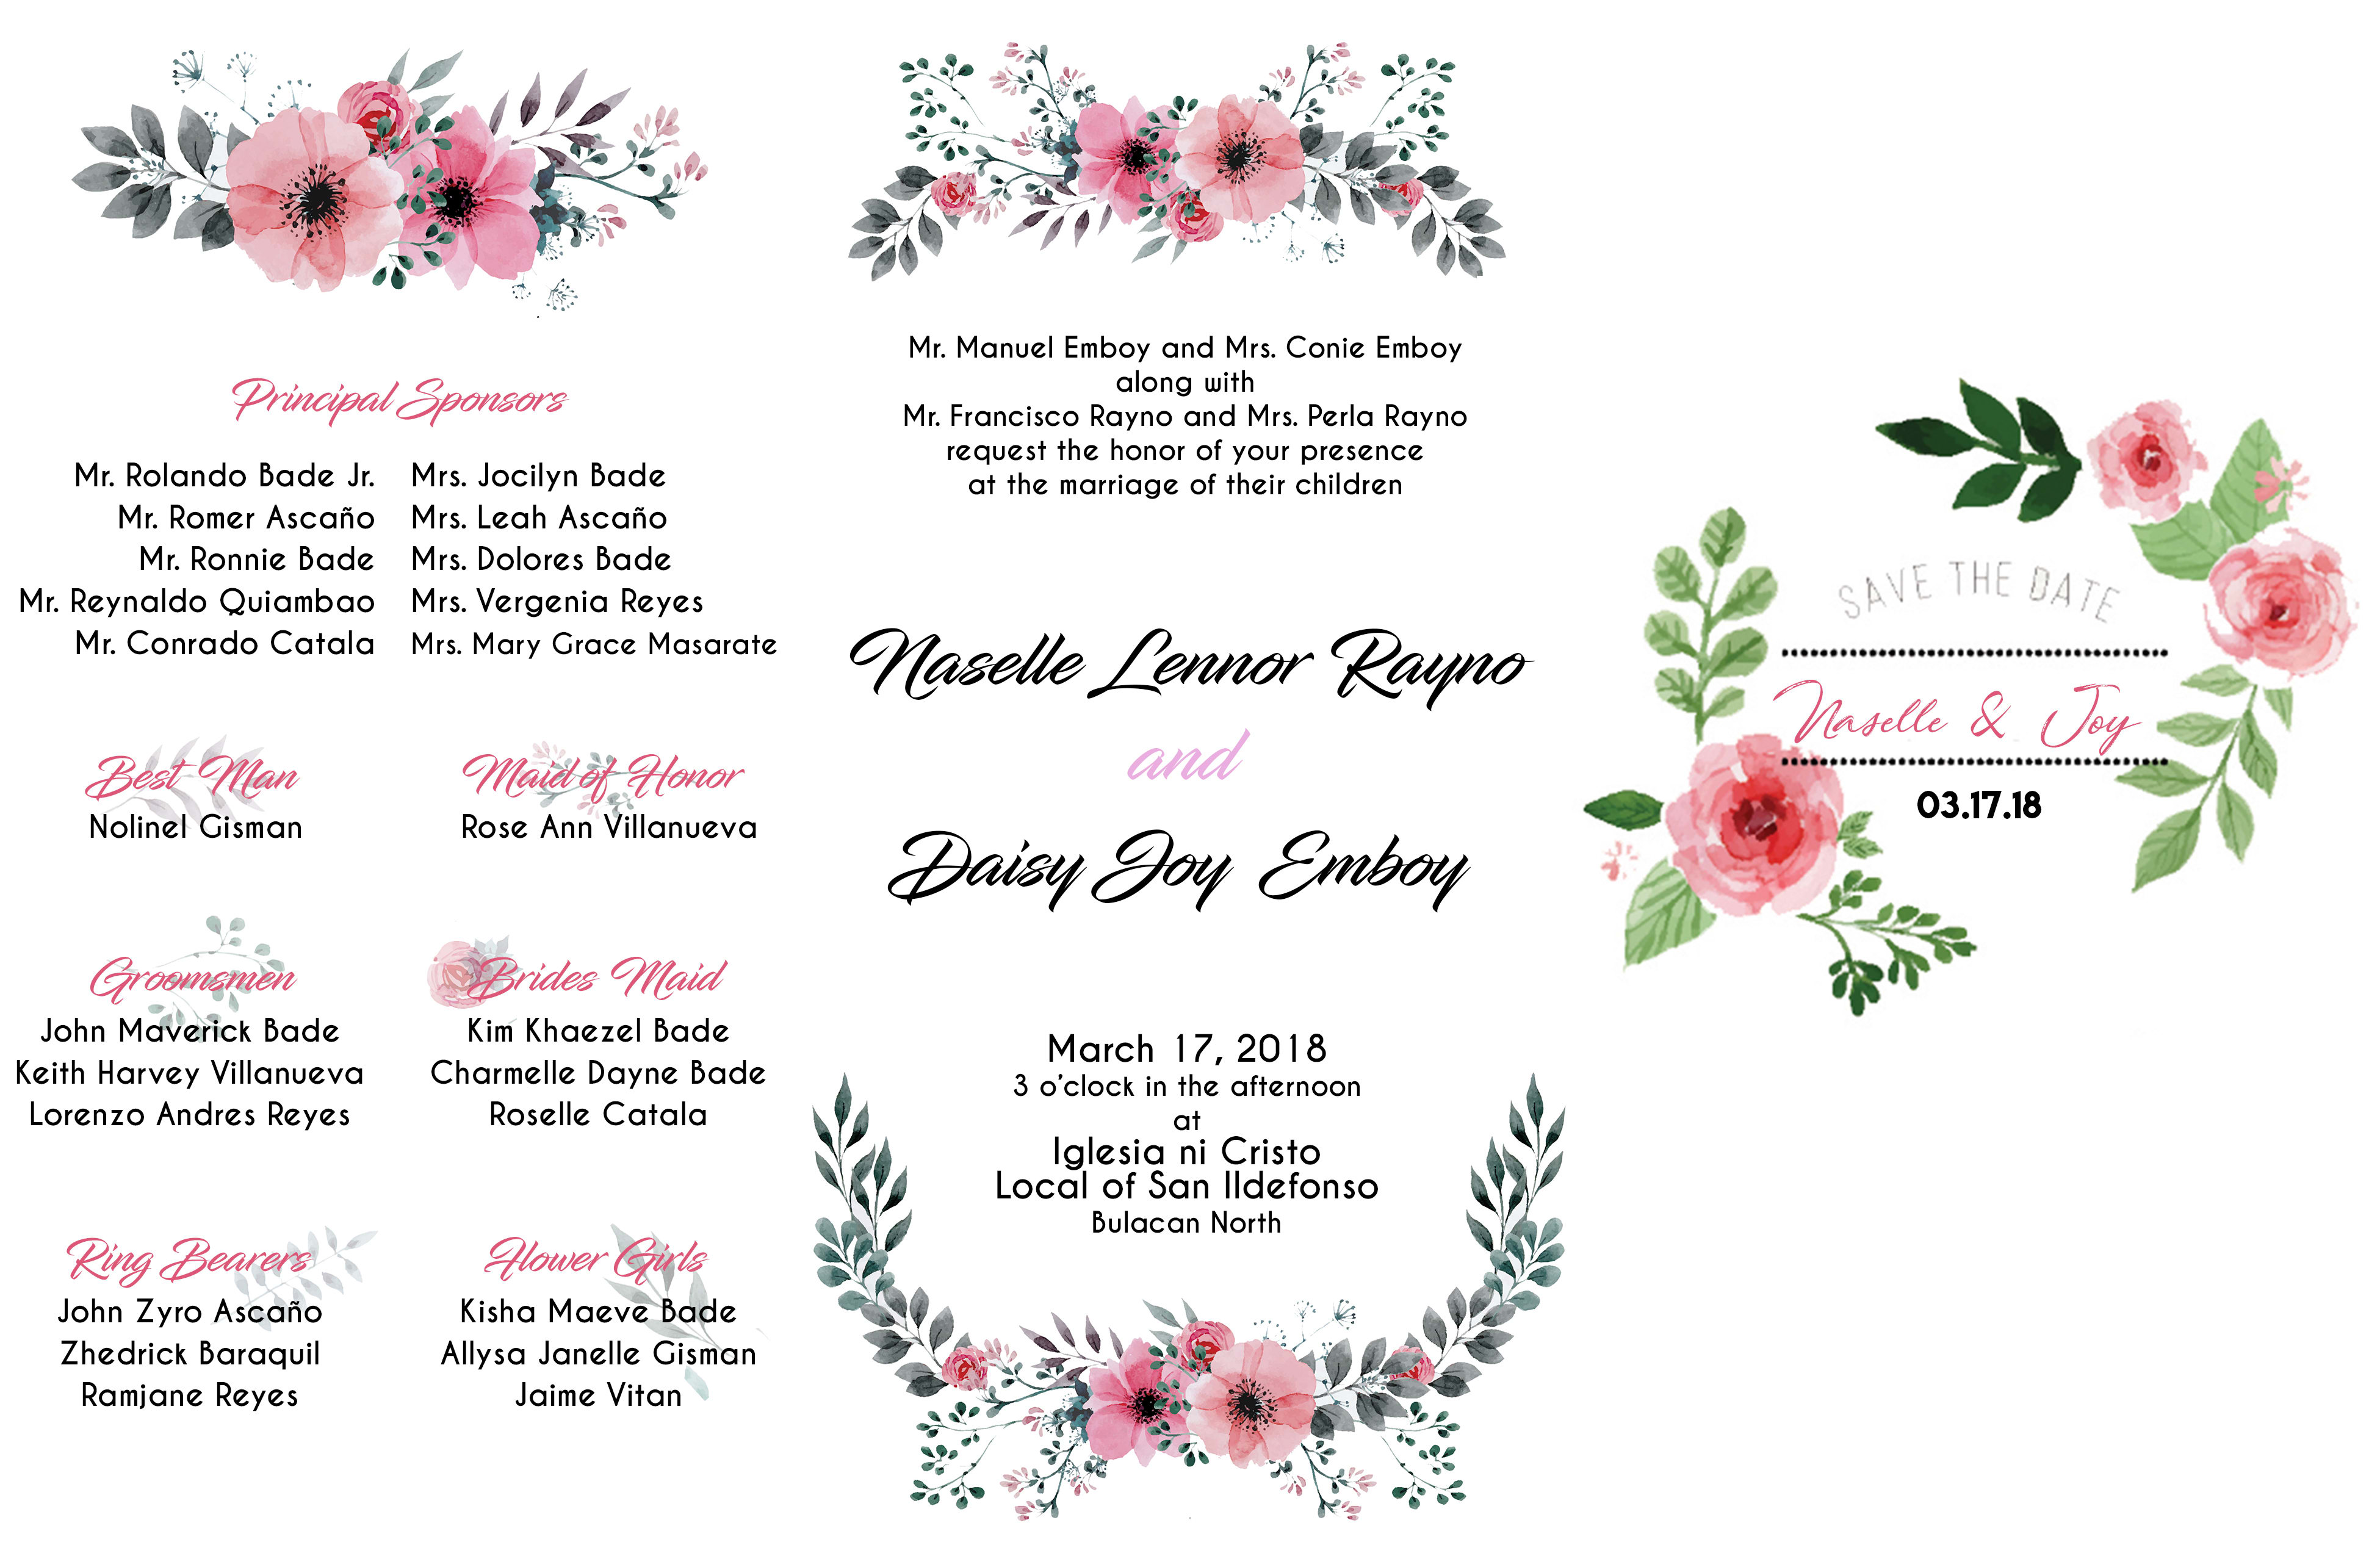 sample-wedding-invitation-in-iglesia-ni-cristo-27-how-to-plan-a-wedding-step-by-step